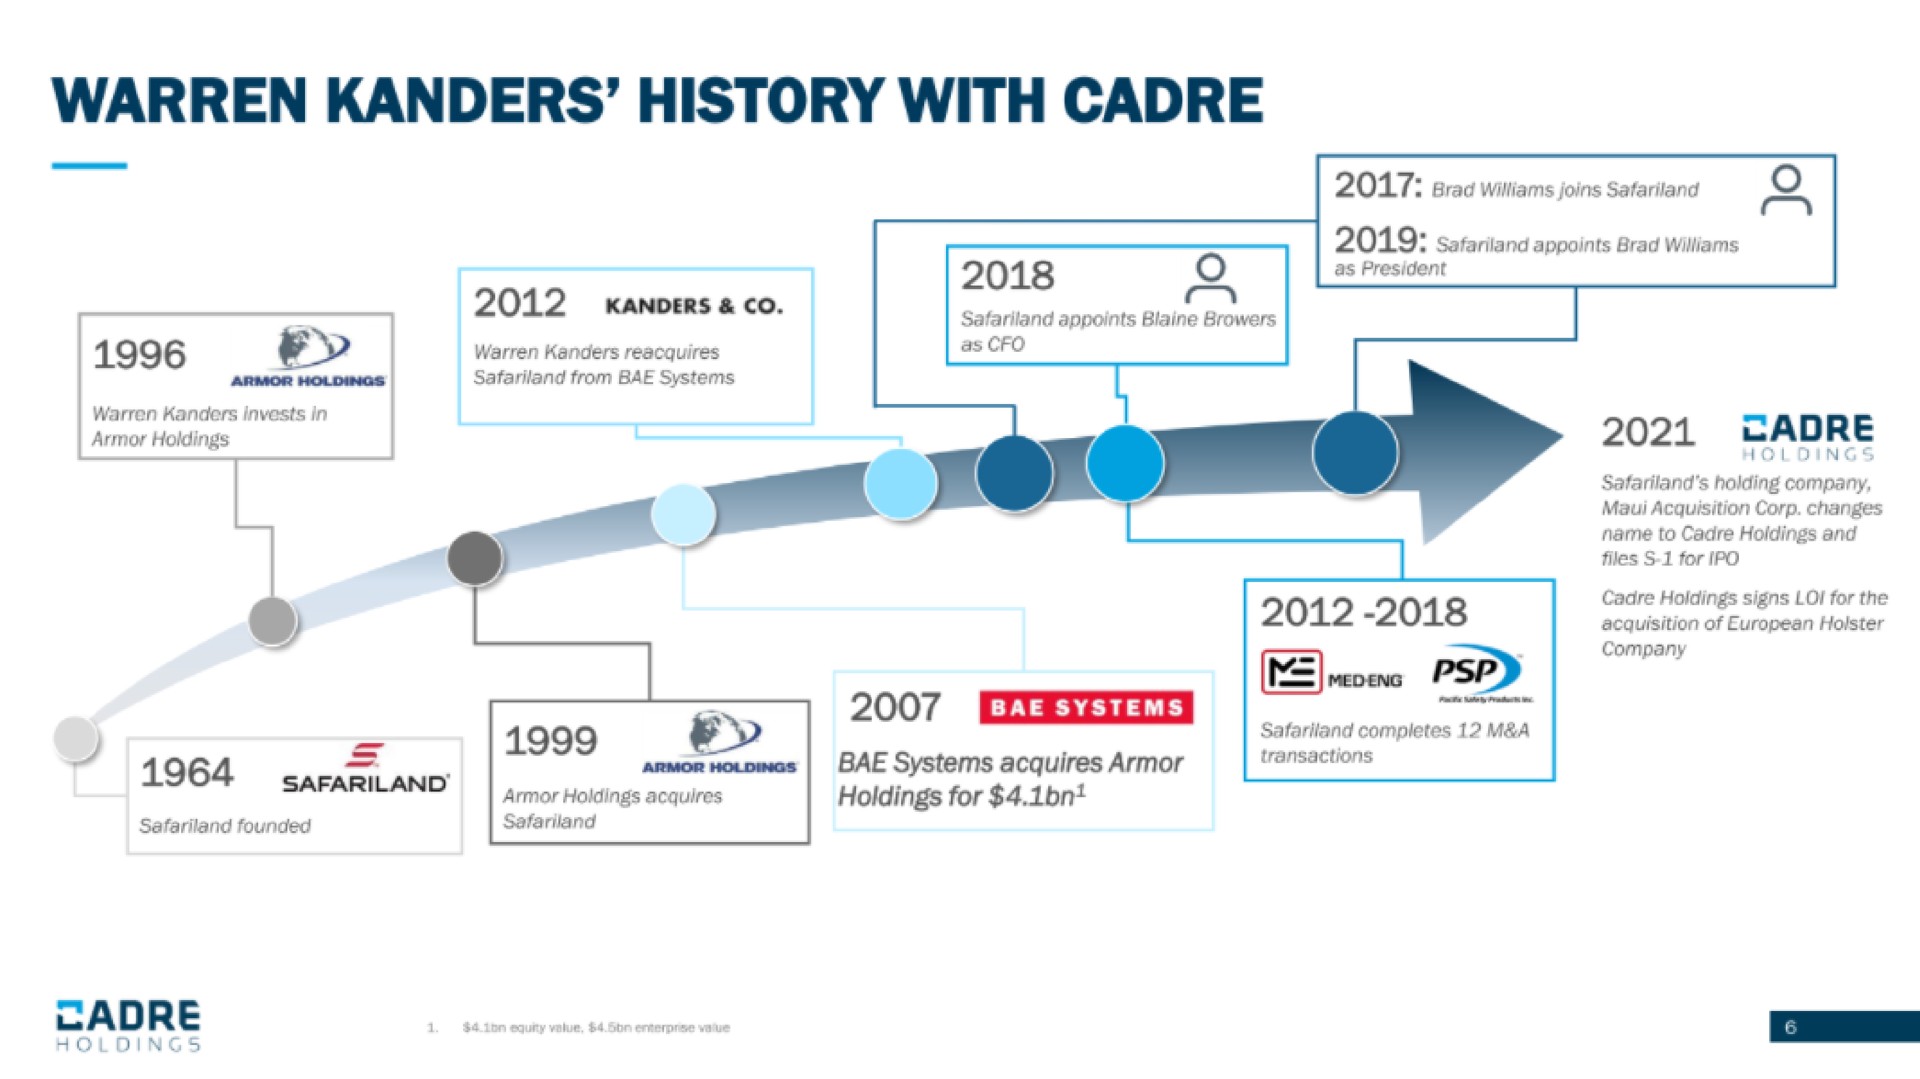 warren history with cadre mone | Cadre Holdings